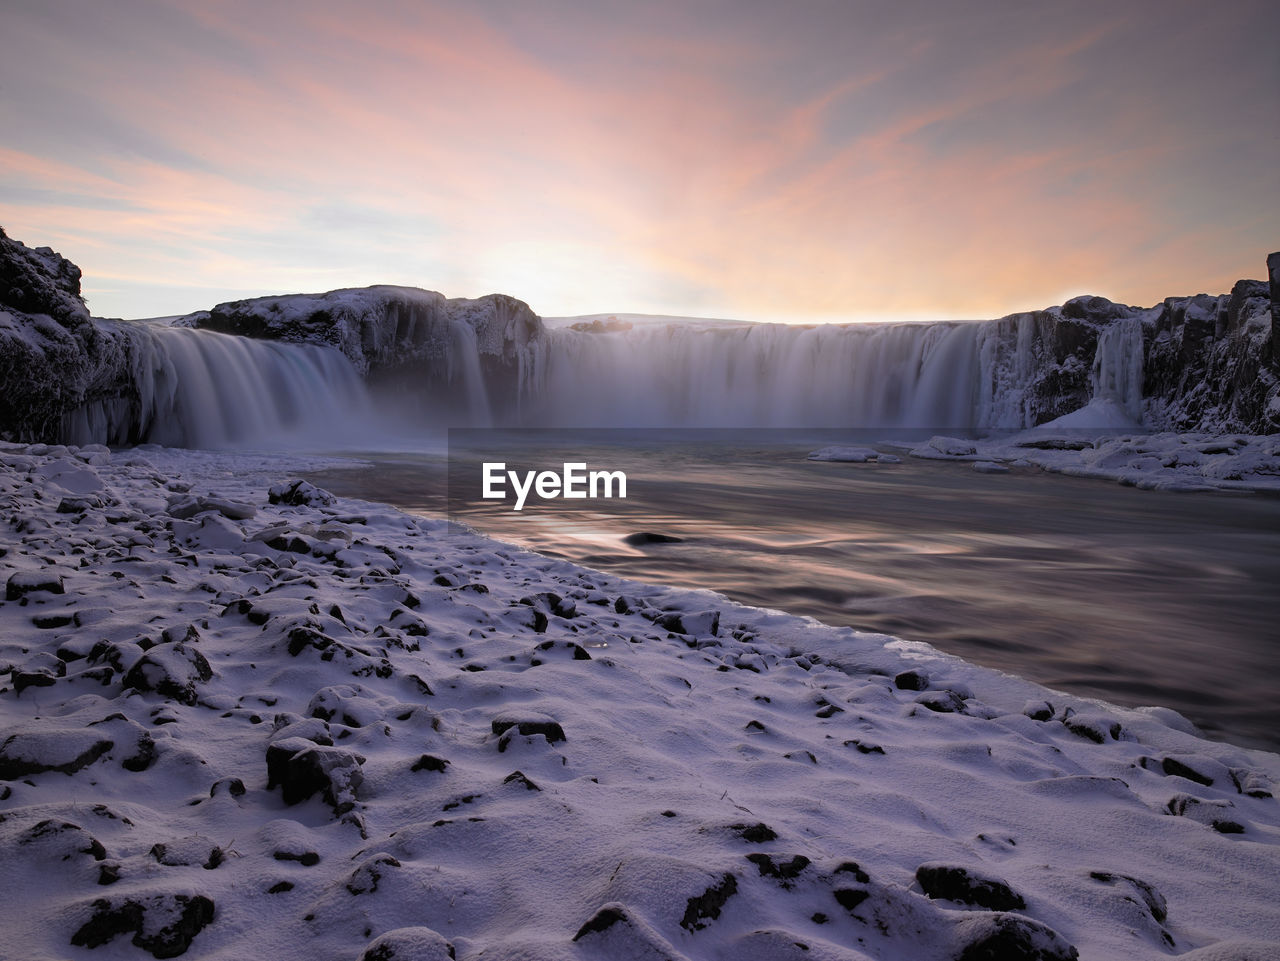 The waterfall godafoss in north iceland in winter